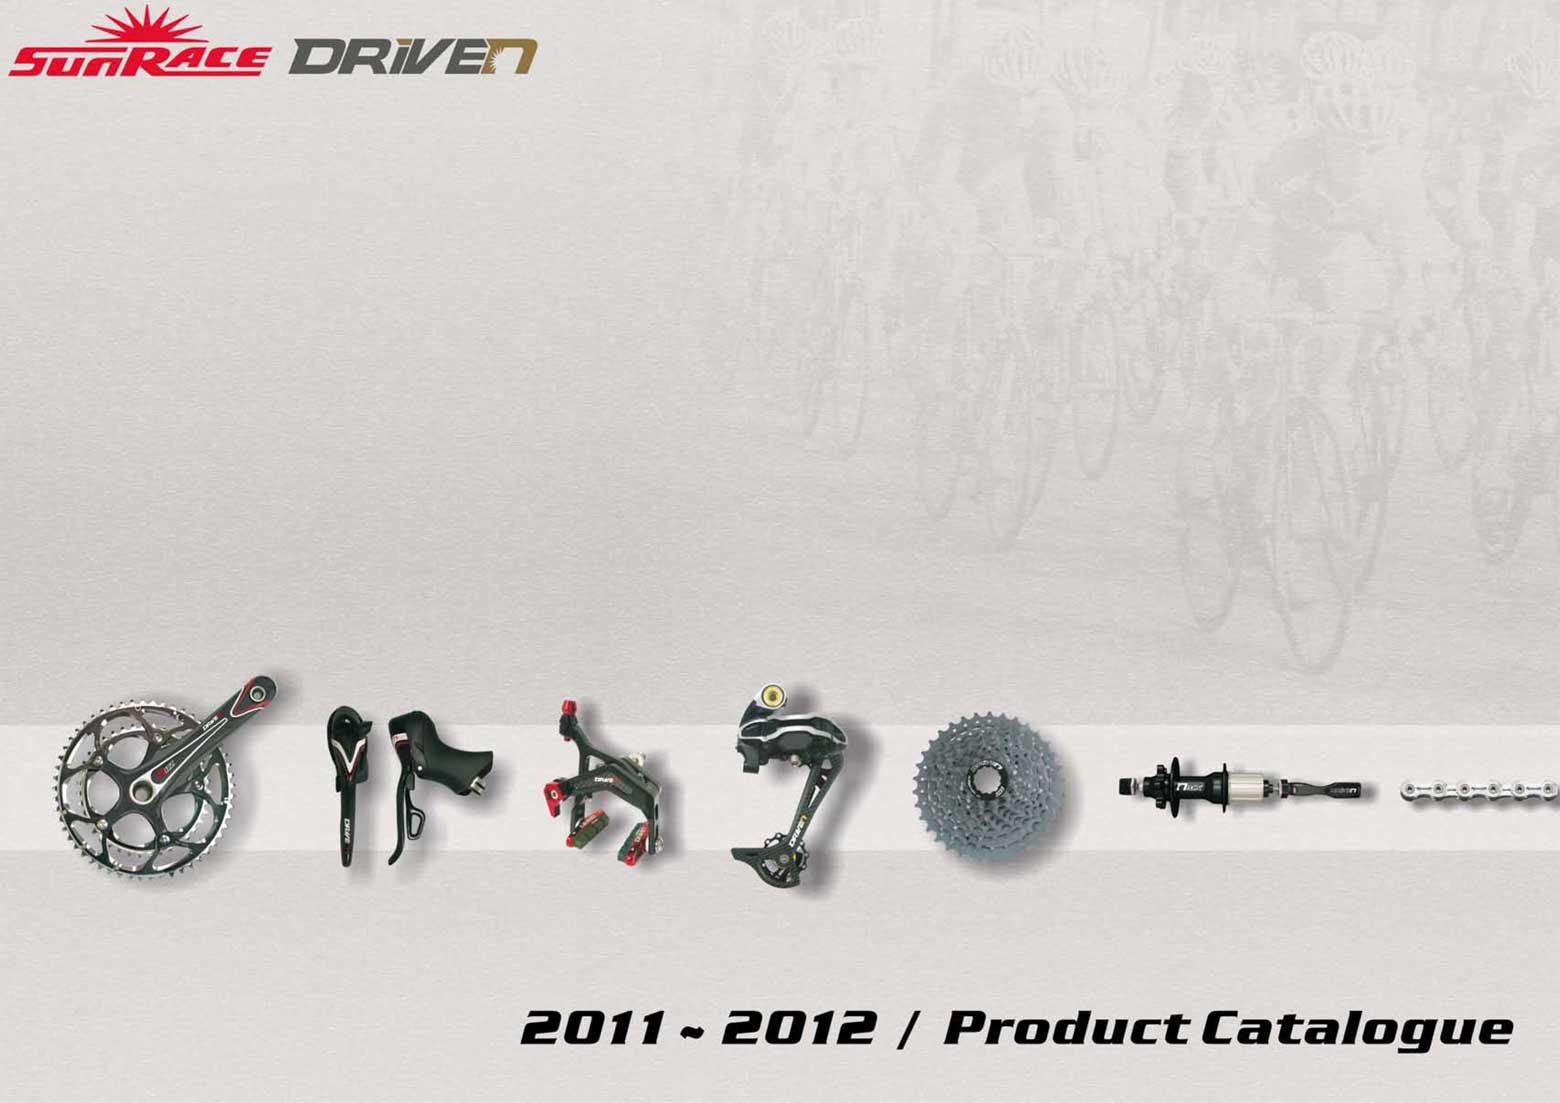 SunRace Product Catalogue 2011-2012 front cover main image